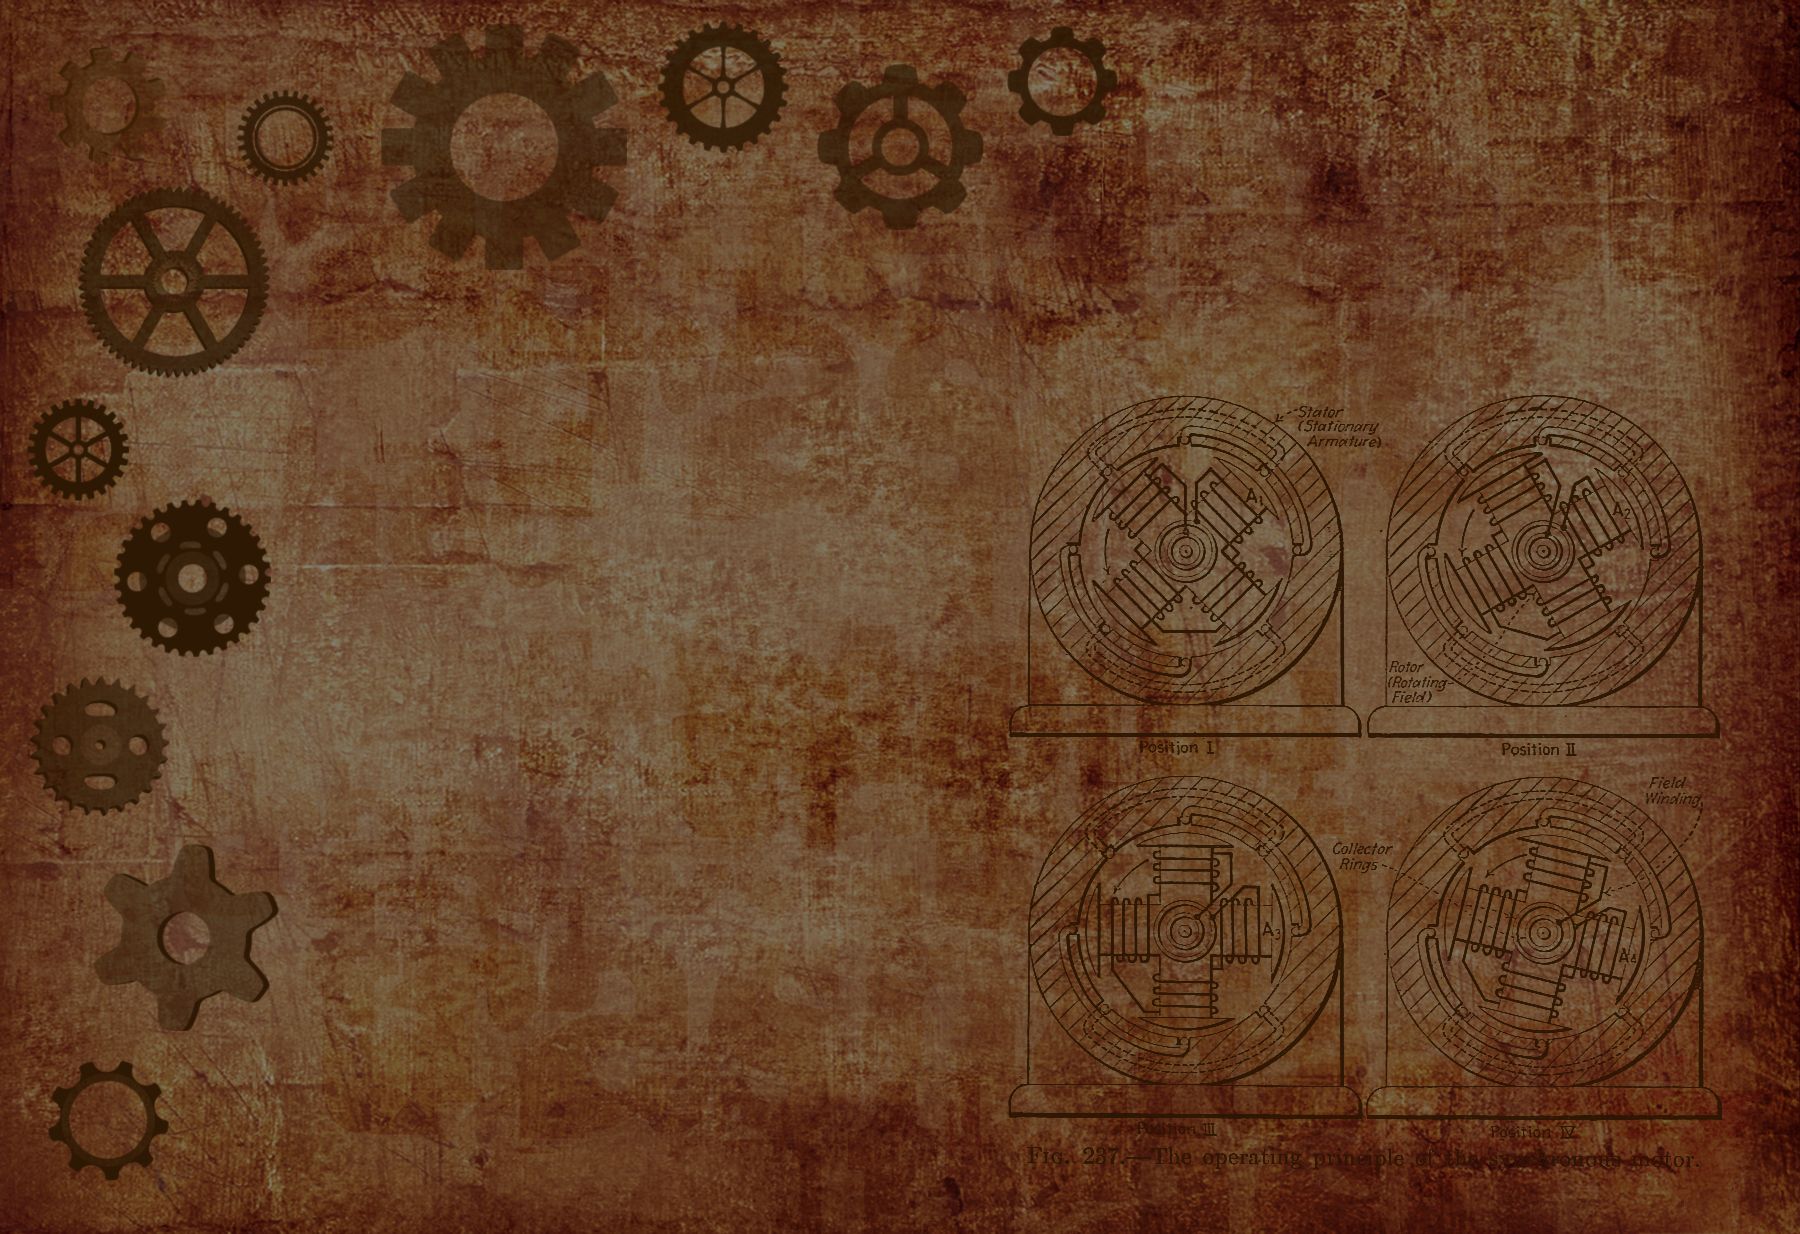 An old, grungy background with gears and cogs - Steampunk